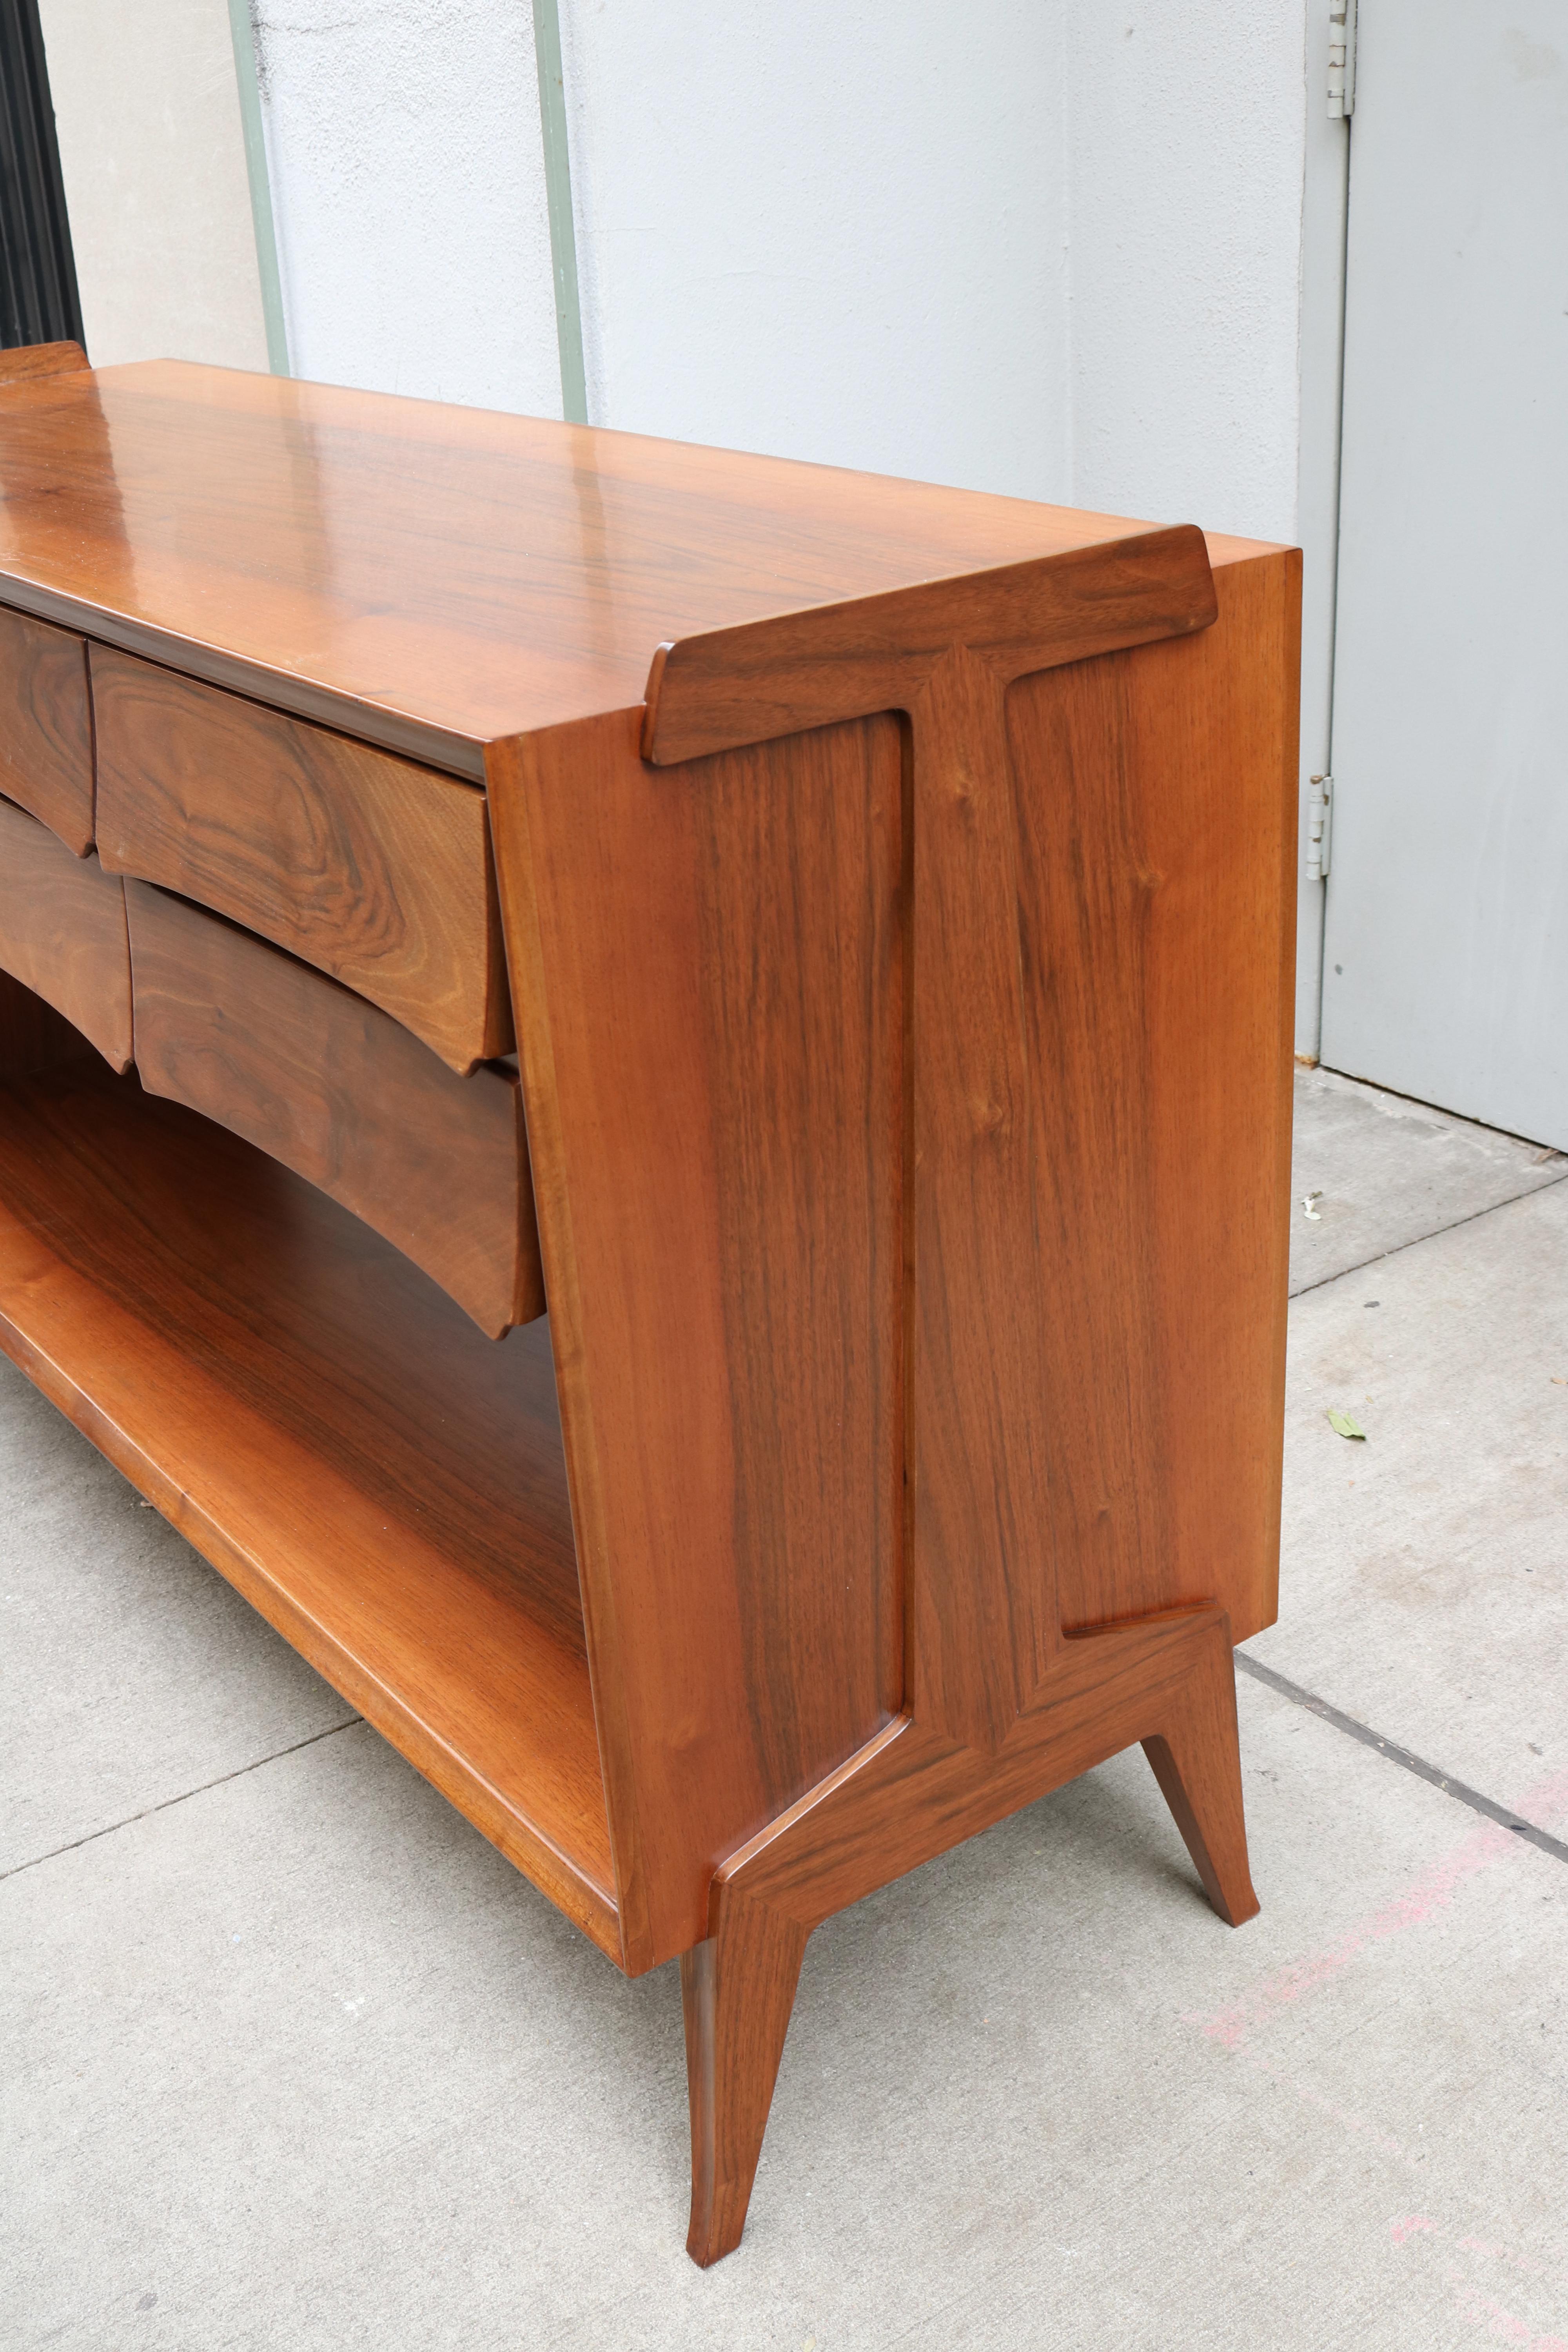 Mid-20th Century Italian Modernist Double Sided Console For Sale